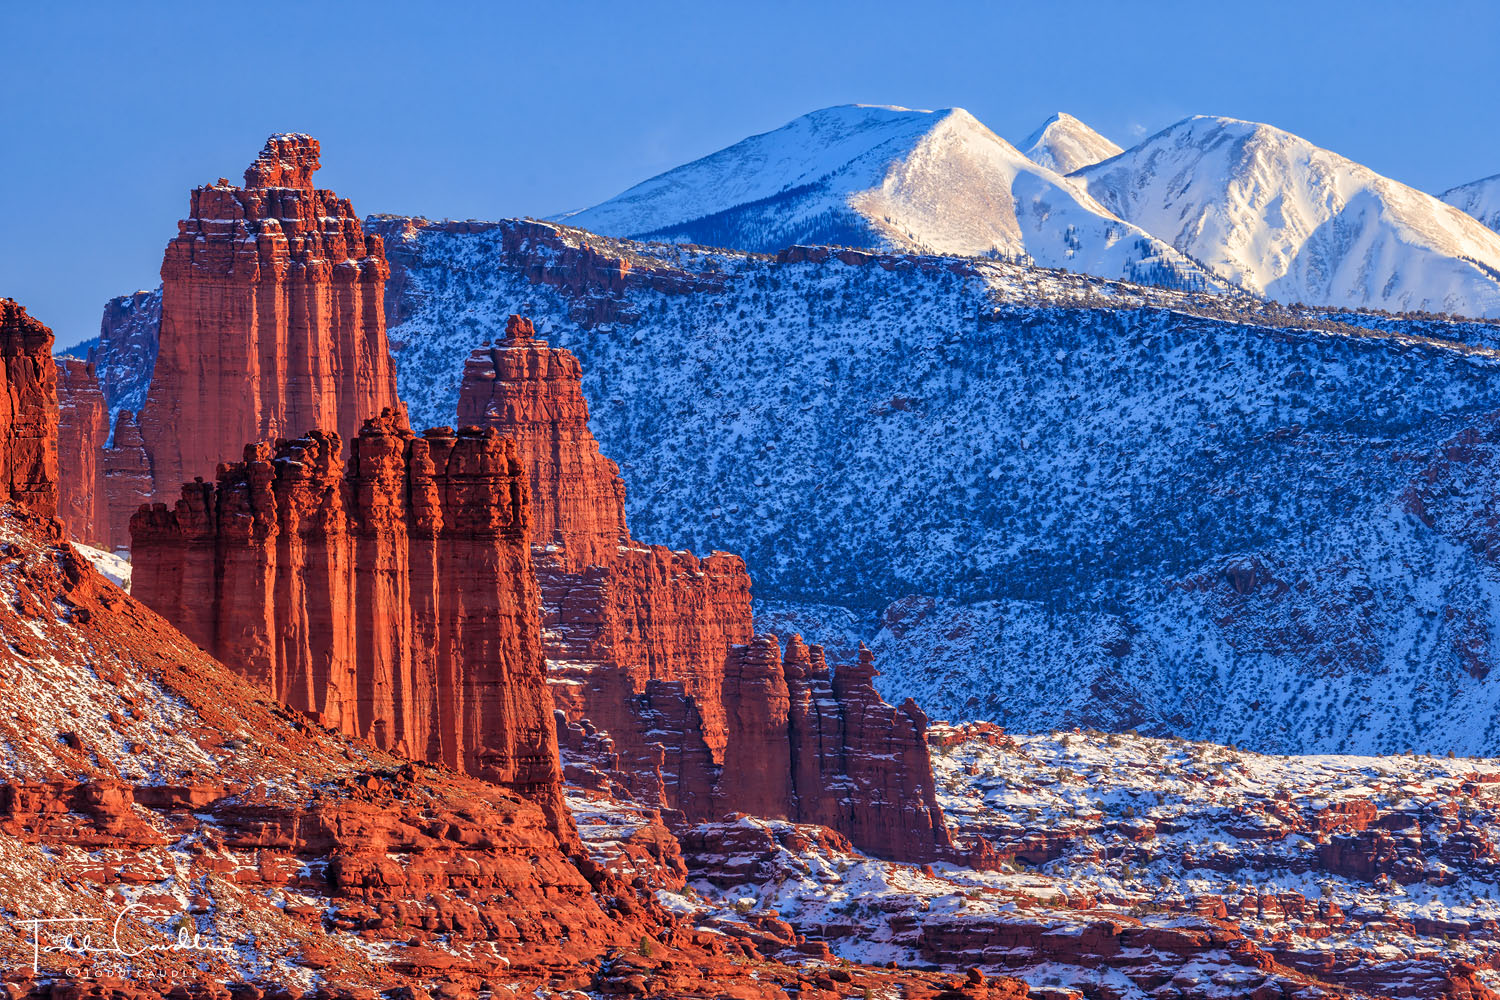 The incredible sandstone monoliths of Fisher Towers stand in stark contrast to the wintry alpine view of the La Sal Mountains...